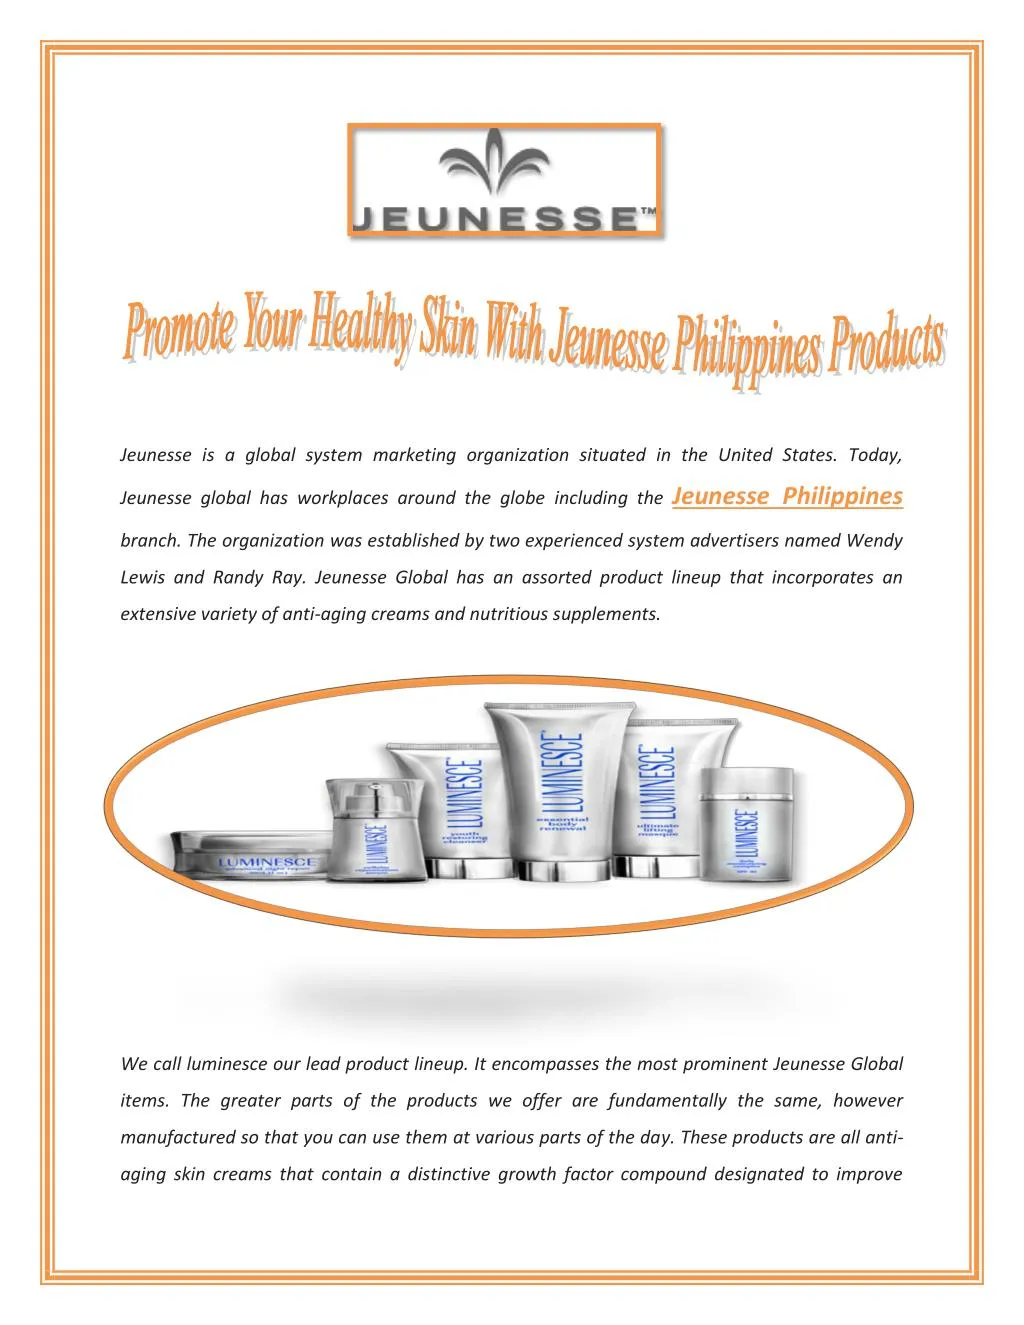 jeunesse is a global system marketing